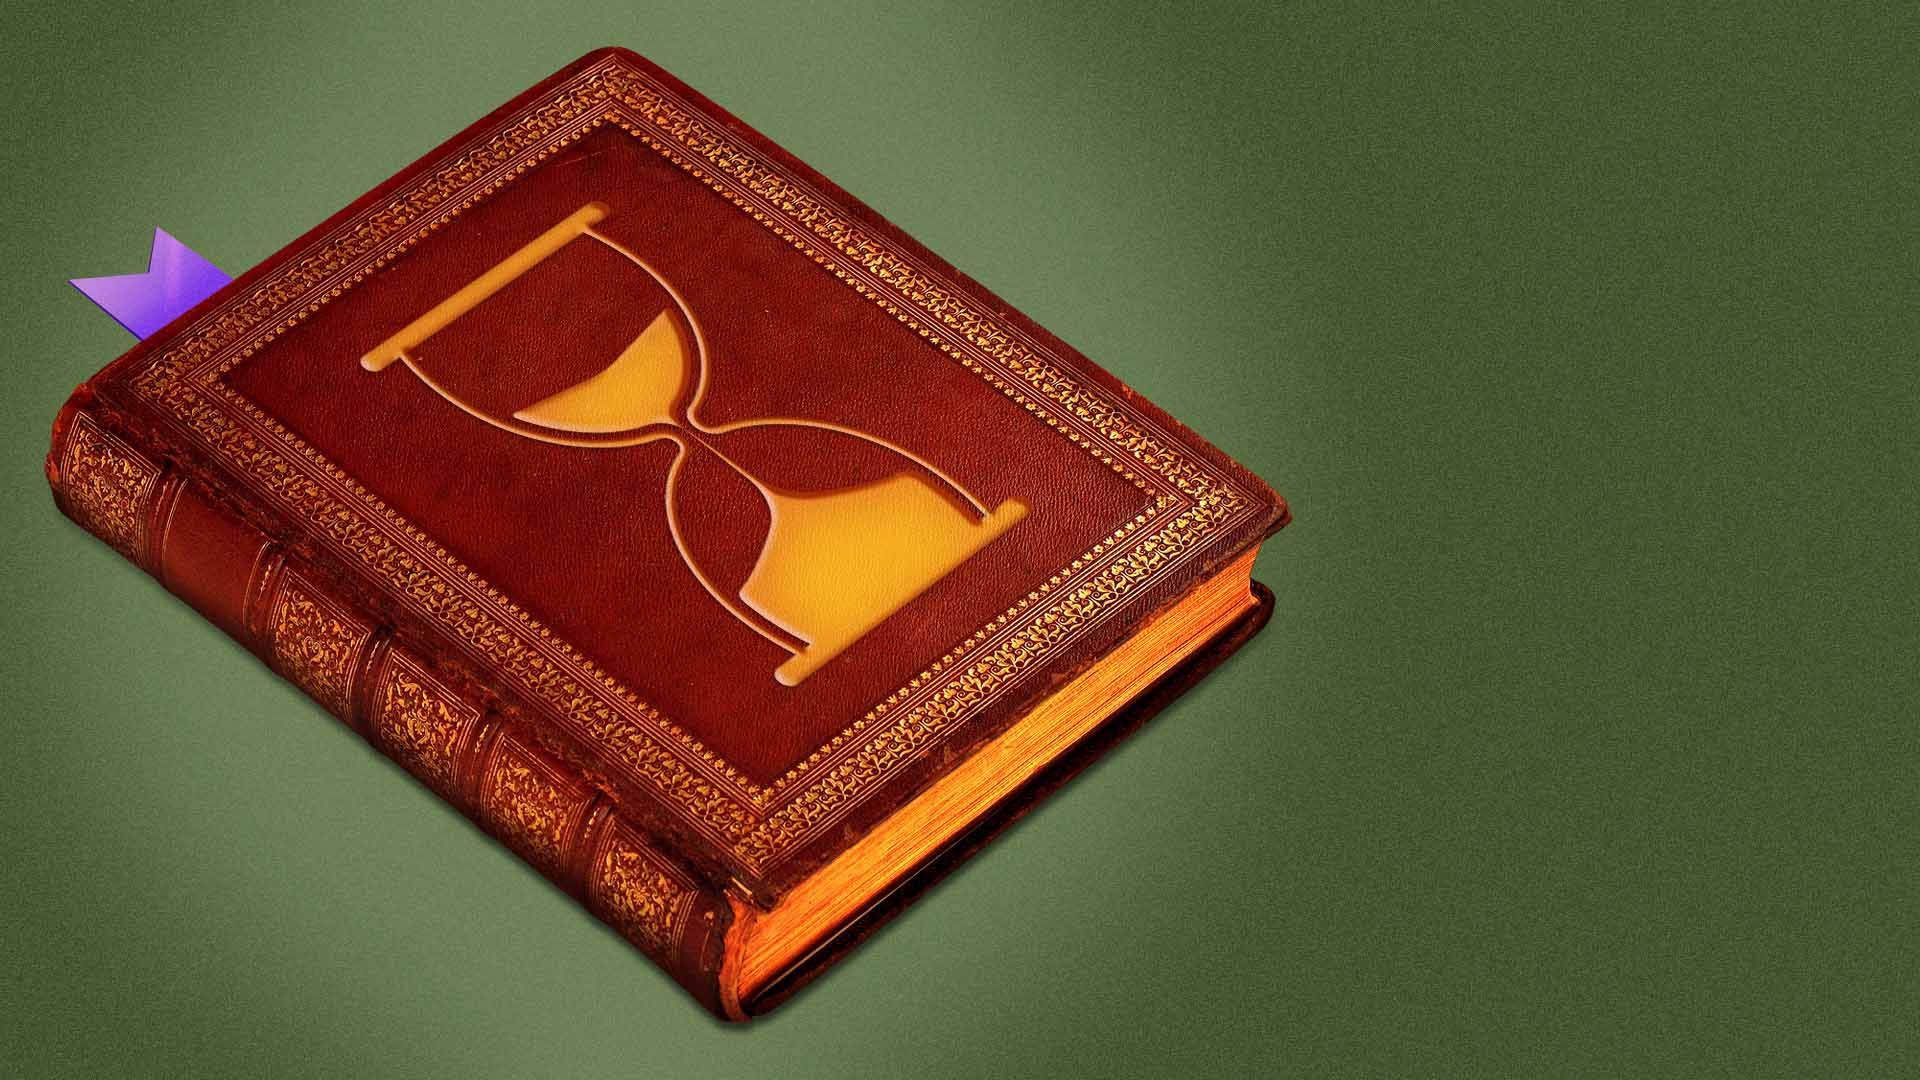 Illustration of an old book with an hourglass on the cover